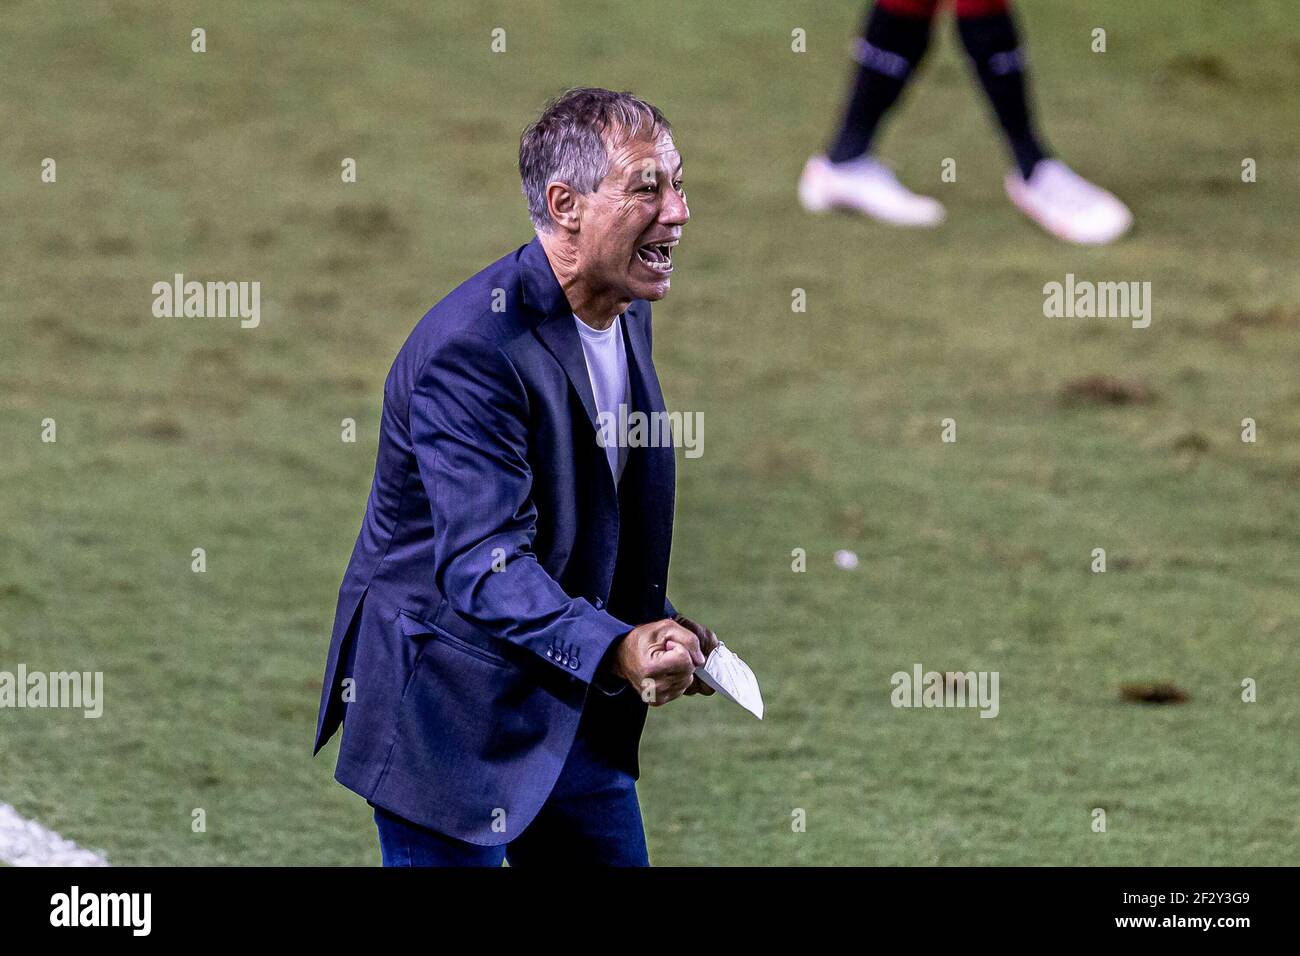 Santos, Brazil. 13th Mar, 2021. The coach Ariel Holan in the match between Santos and Ituano valid for the 4th round of the Paulista Championship Football Series A, held at Estádio Urbano Caldeira, Vila Belmiro, on the night of this Saturday, March 13, 2021. Credit: Van Campos/FotoArena/Alamy Live News Stock Photo